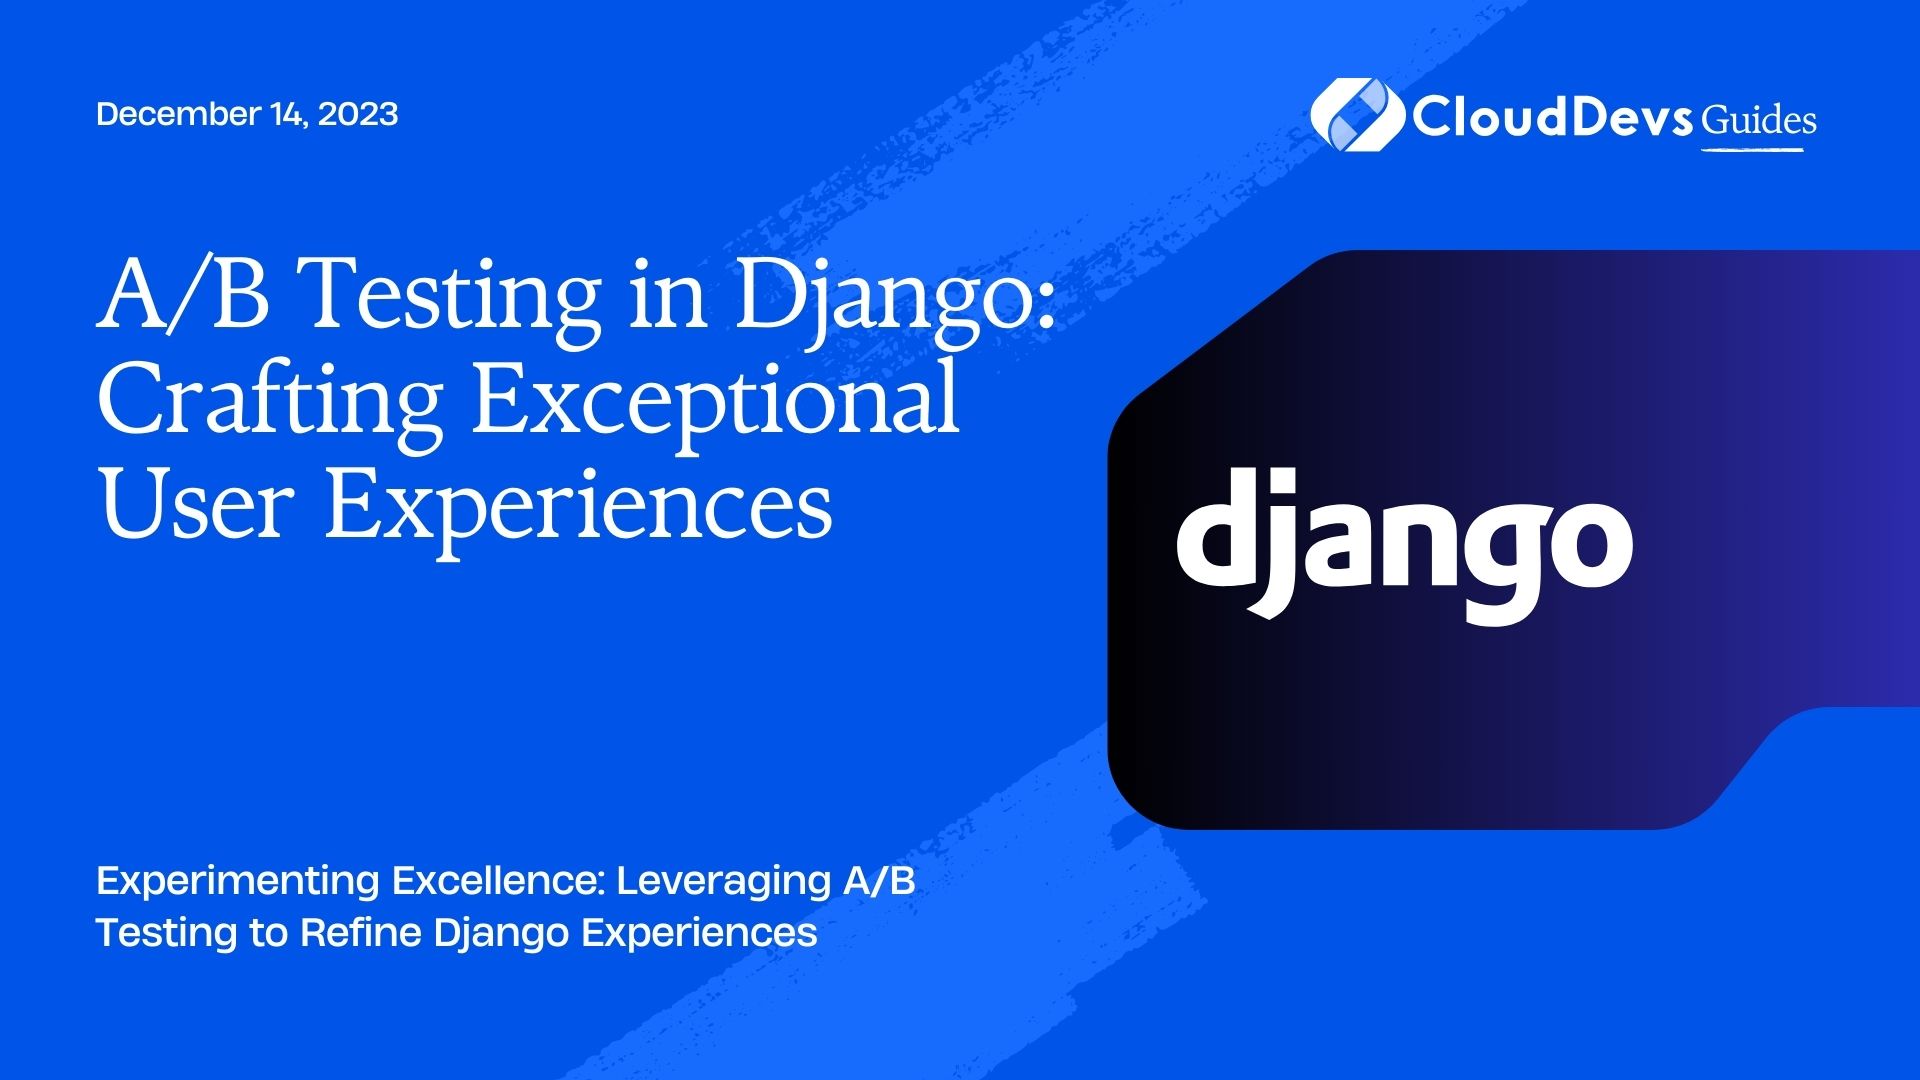 A/B Testing in Django: Crafting Exceptional User Experiences